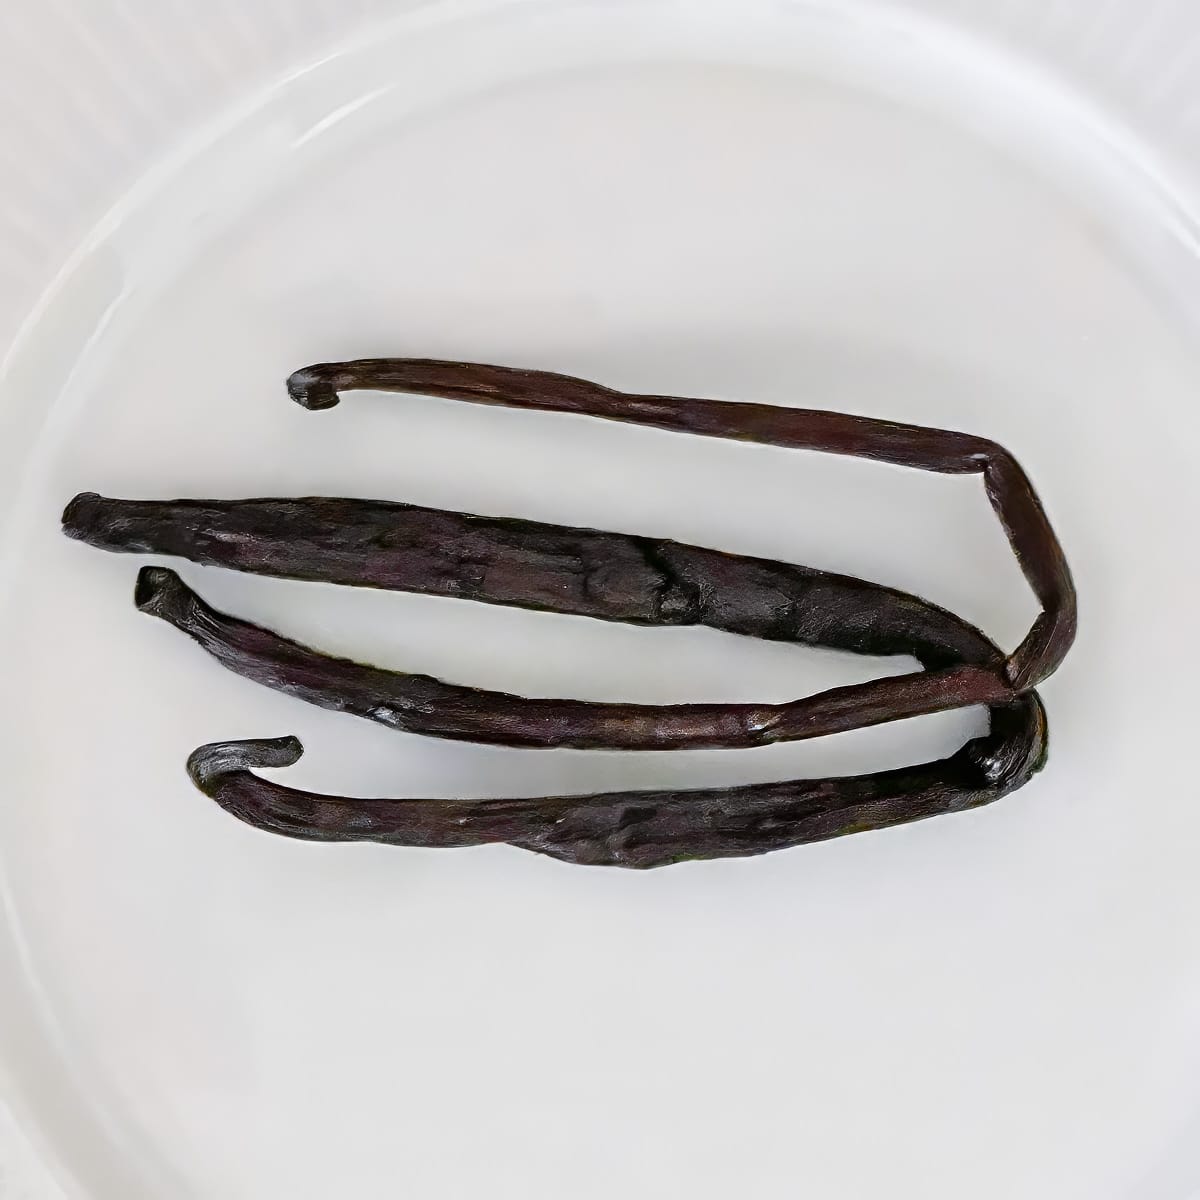 Two vanilla bean pods on a plate.